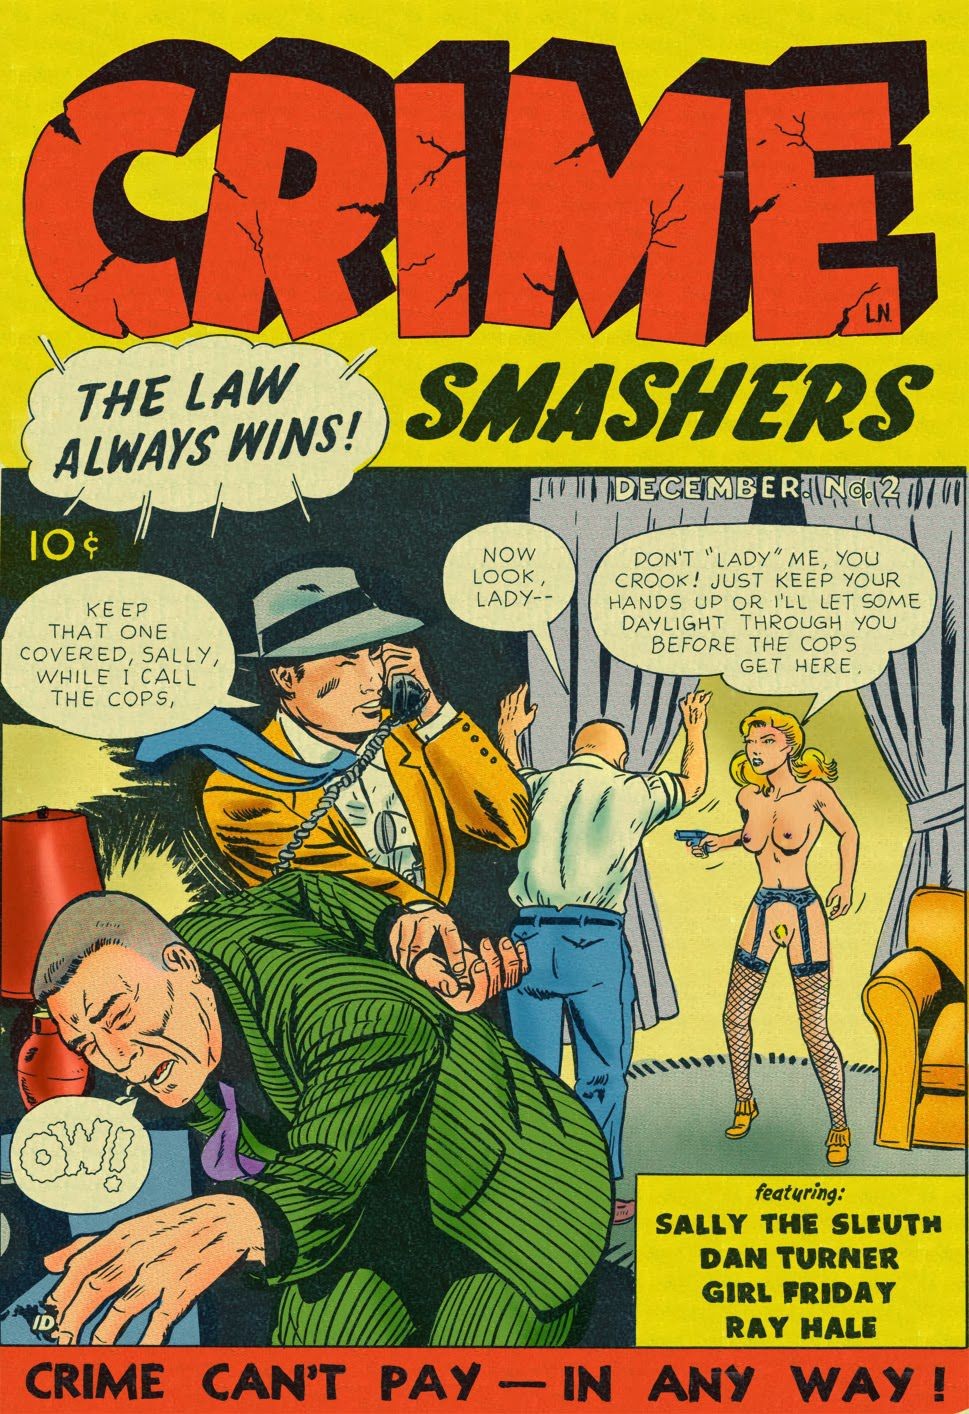 Hot Whores [The Wertham Files] Crime Smashers! 2 [Incomplete] Muscle